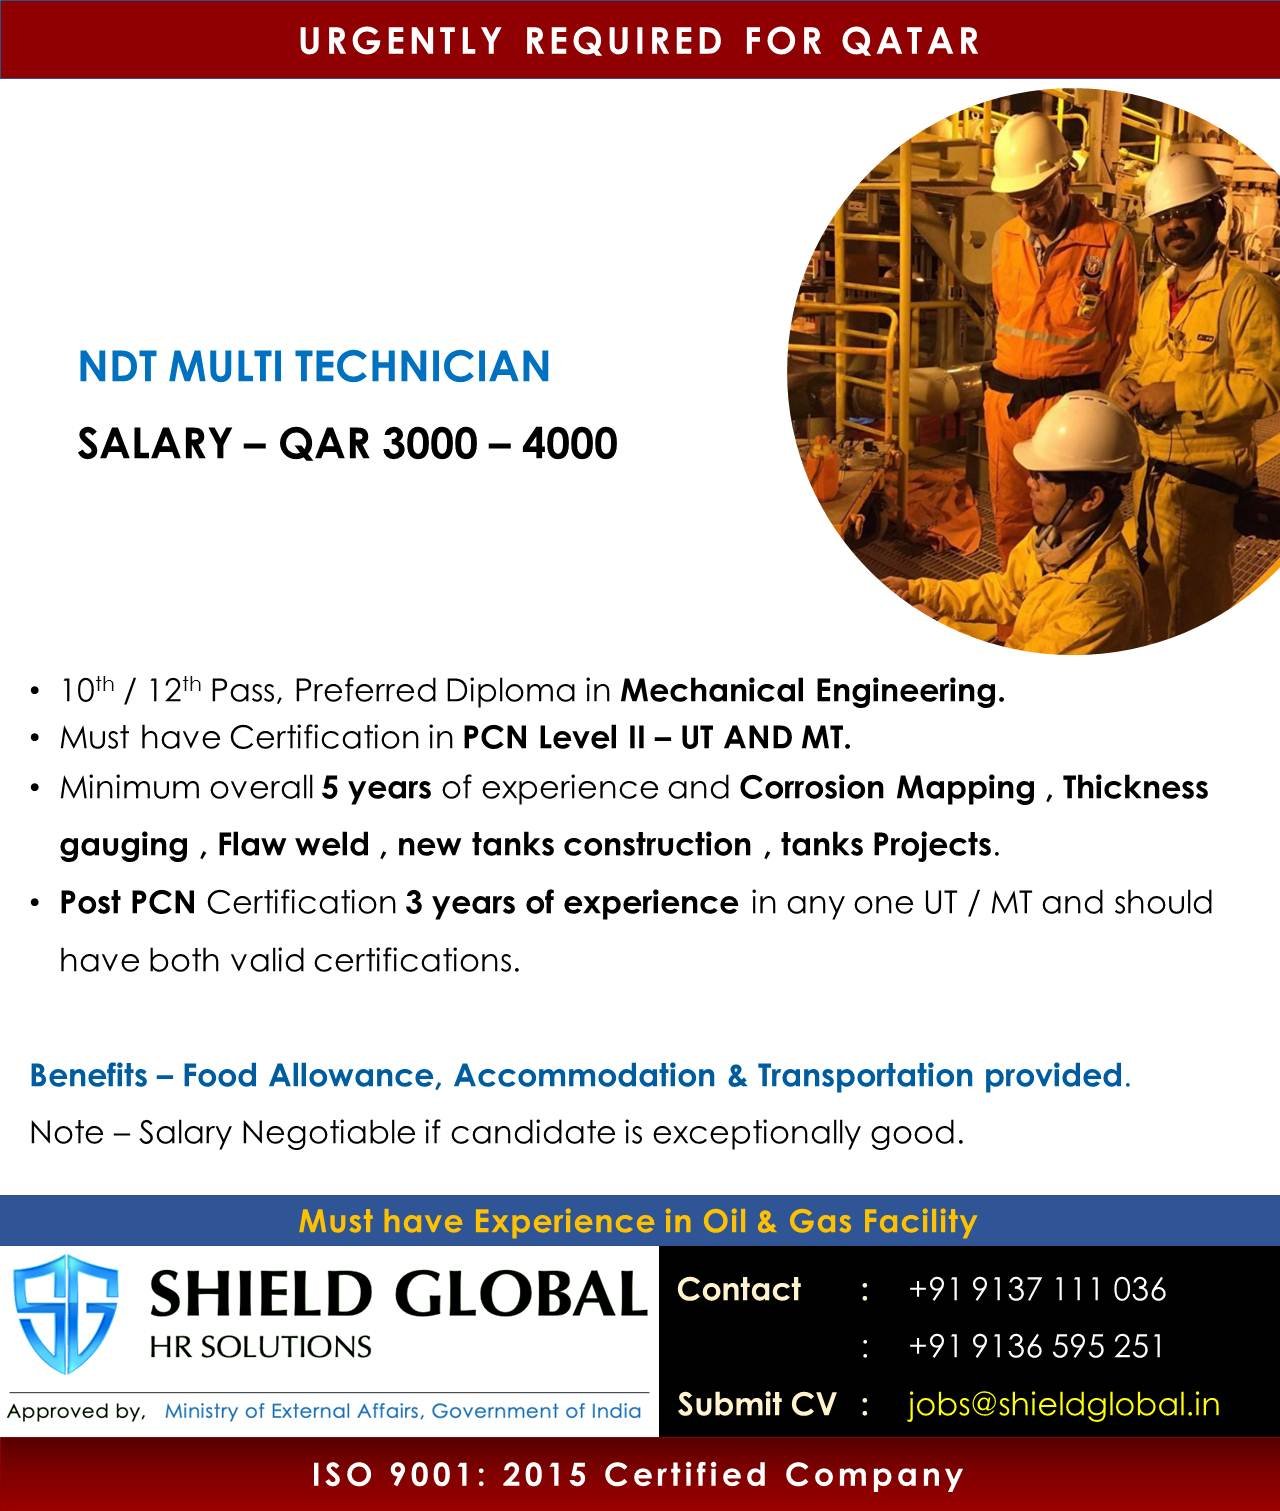 SHIELD GLOBAL HR SOLUTIONS #SHIELD #GLOBAL #SOLUTIONS